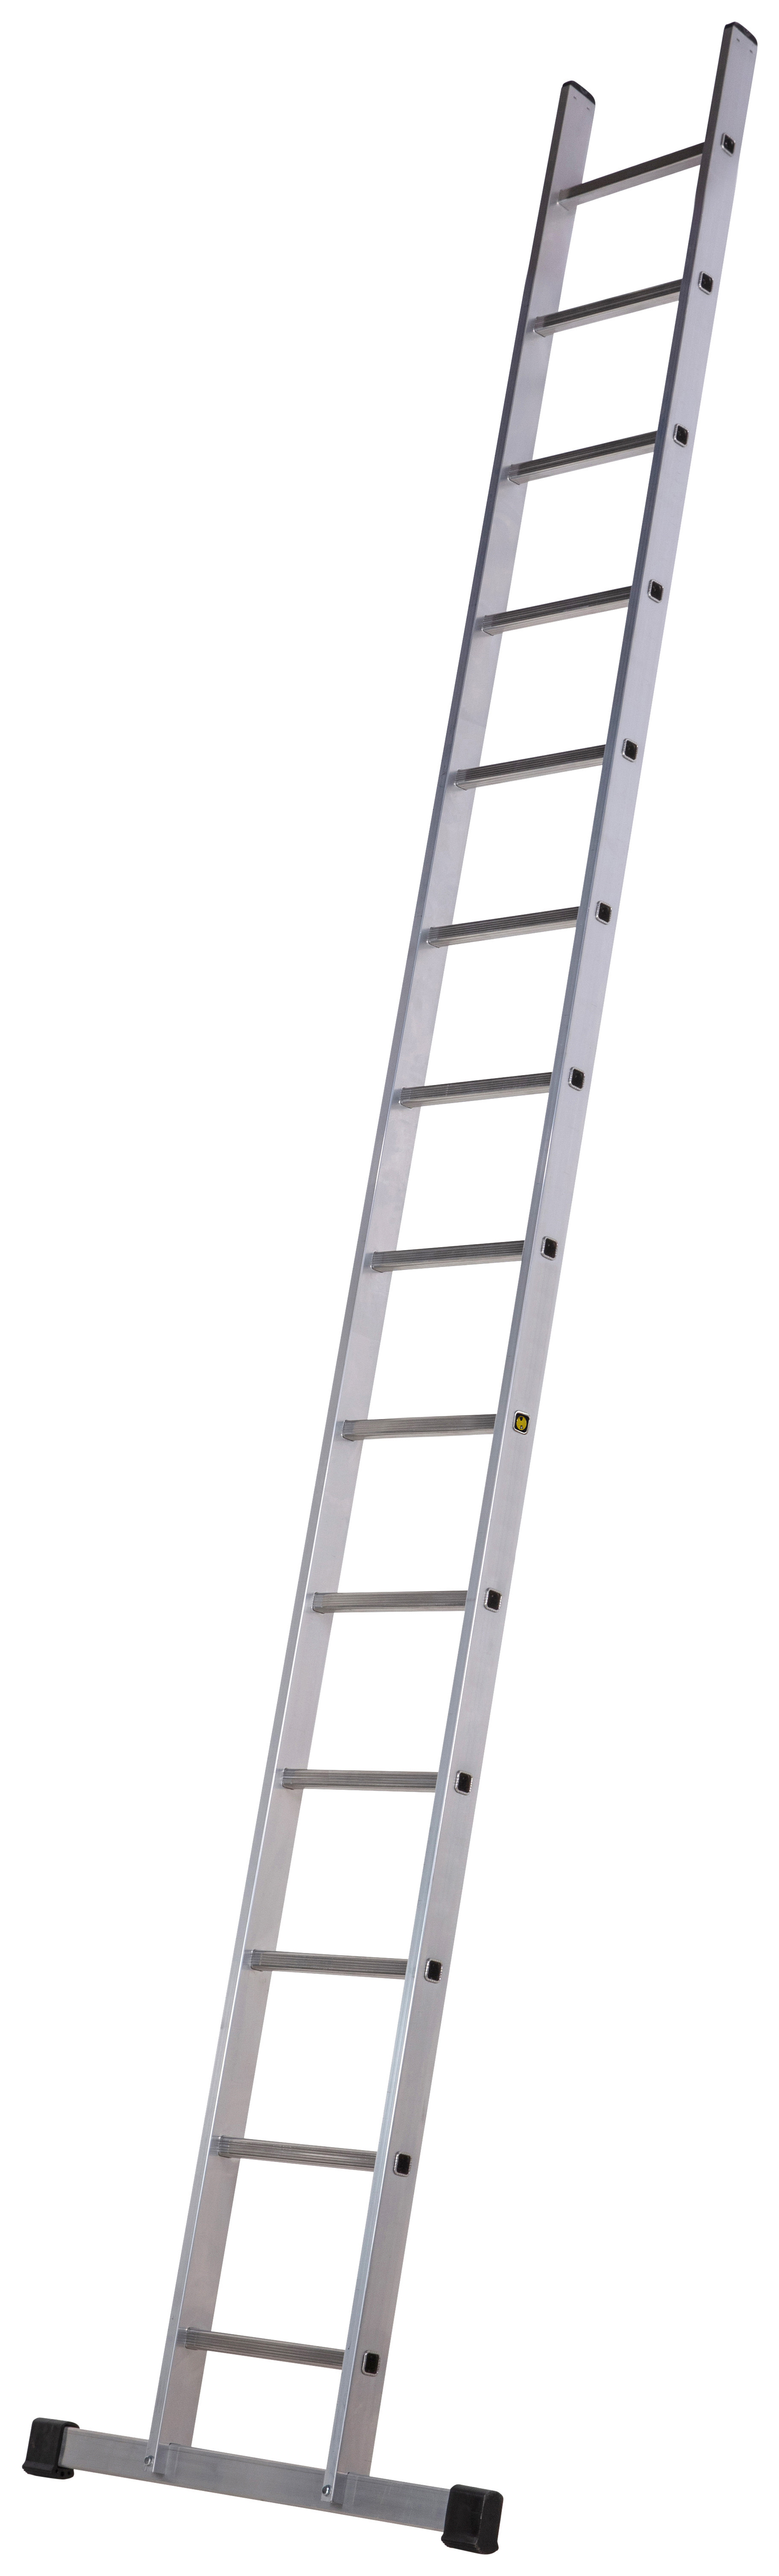 Werner Square Rung Pro Single Section Trade Ladder - 4.18m